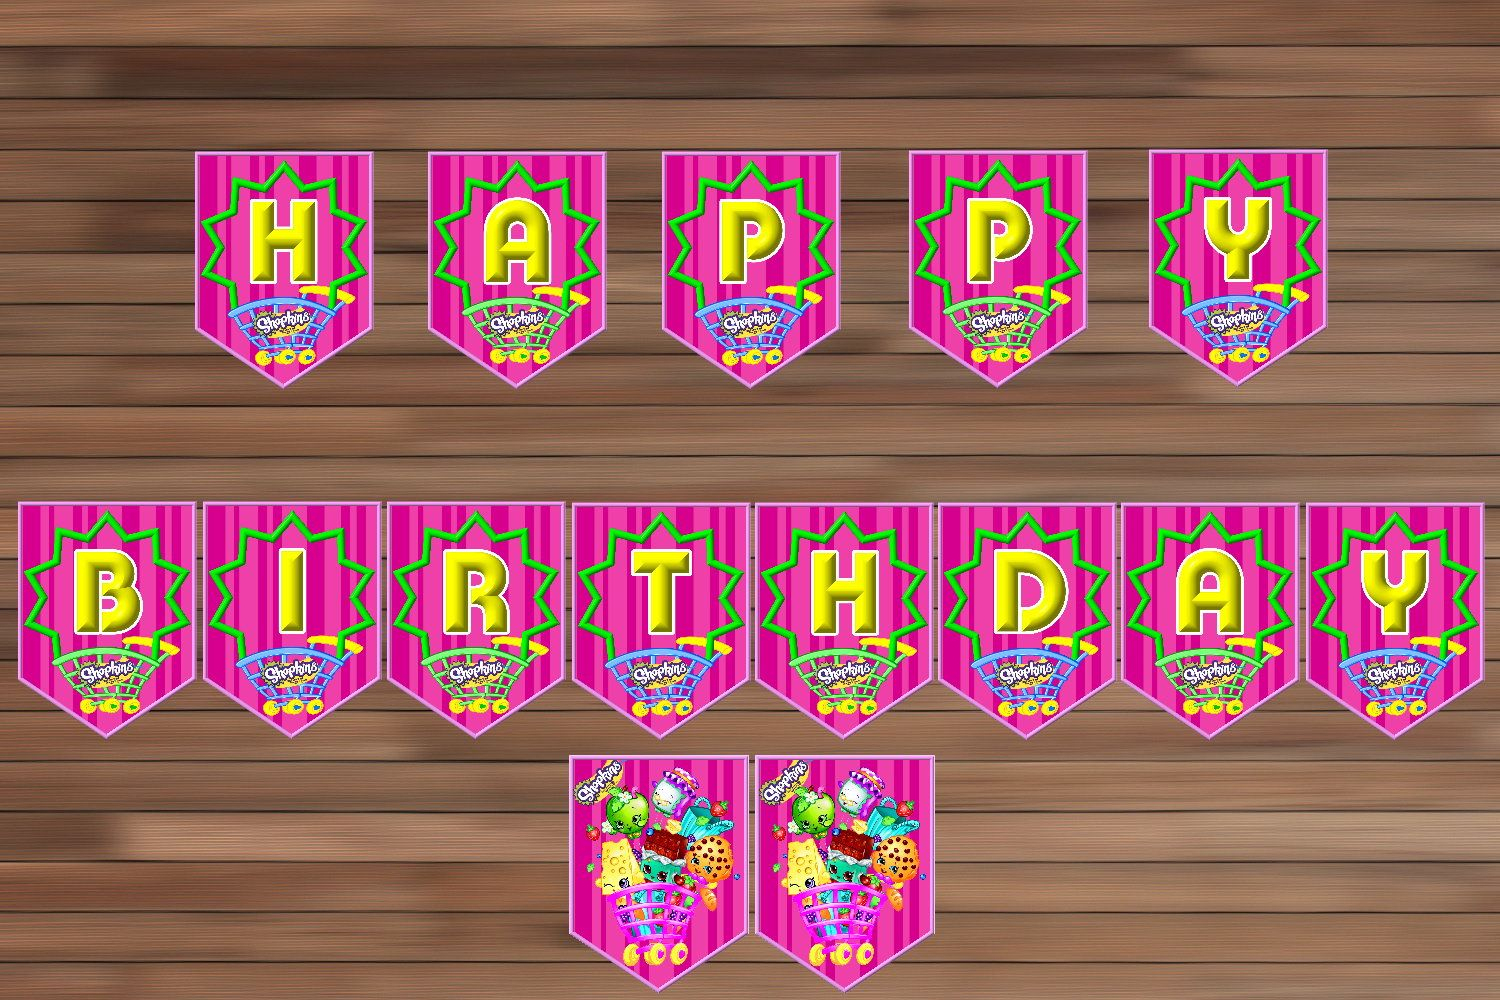 7 Images Of S Hopkins Birthday Party Printables | Prints | Pinterest - Shopkins Banner Printable Free